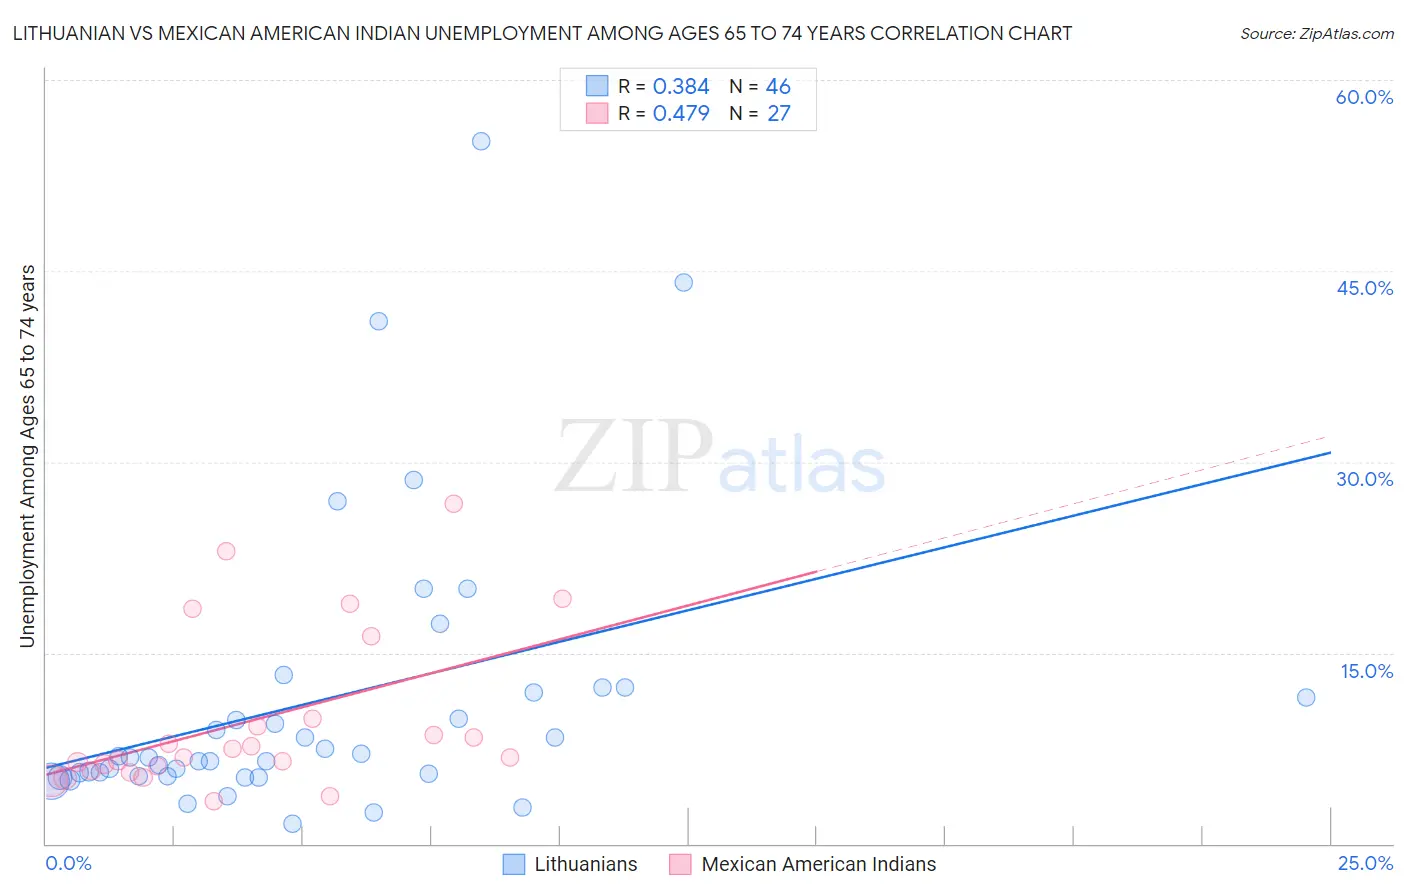 Lithuanian vs Mexican American Indian Unemployment Among Ages 65 to 74 years